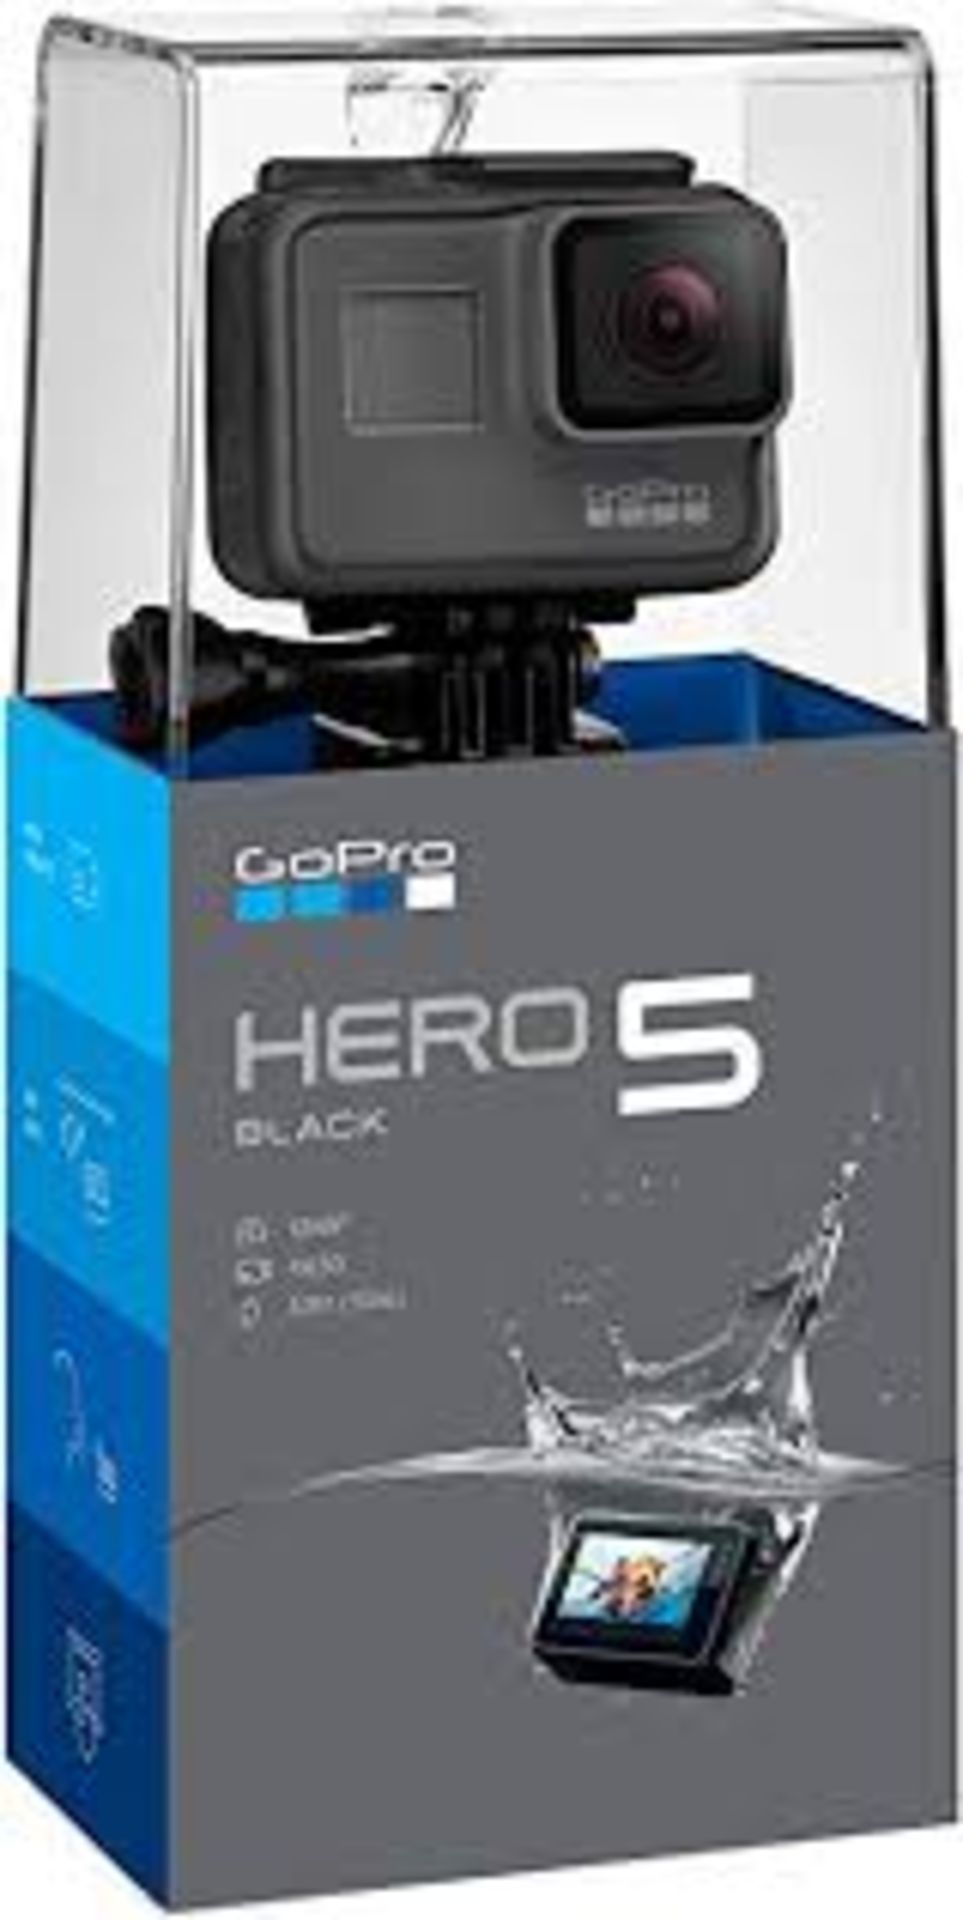 Boxed Go Pro Hero 5 Black Edition Waterproof Action Camera RRP £330 (Pictures Are For Illustration